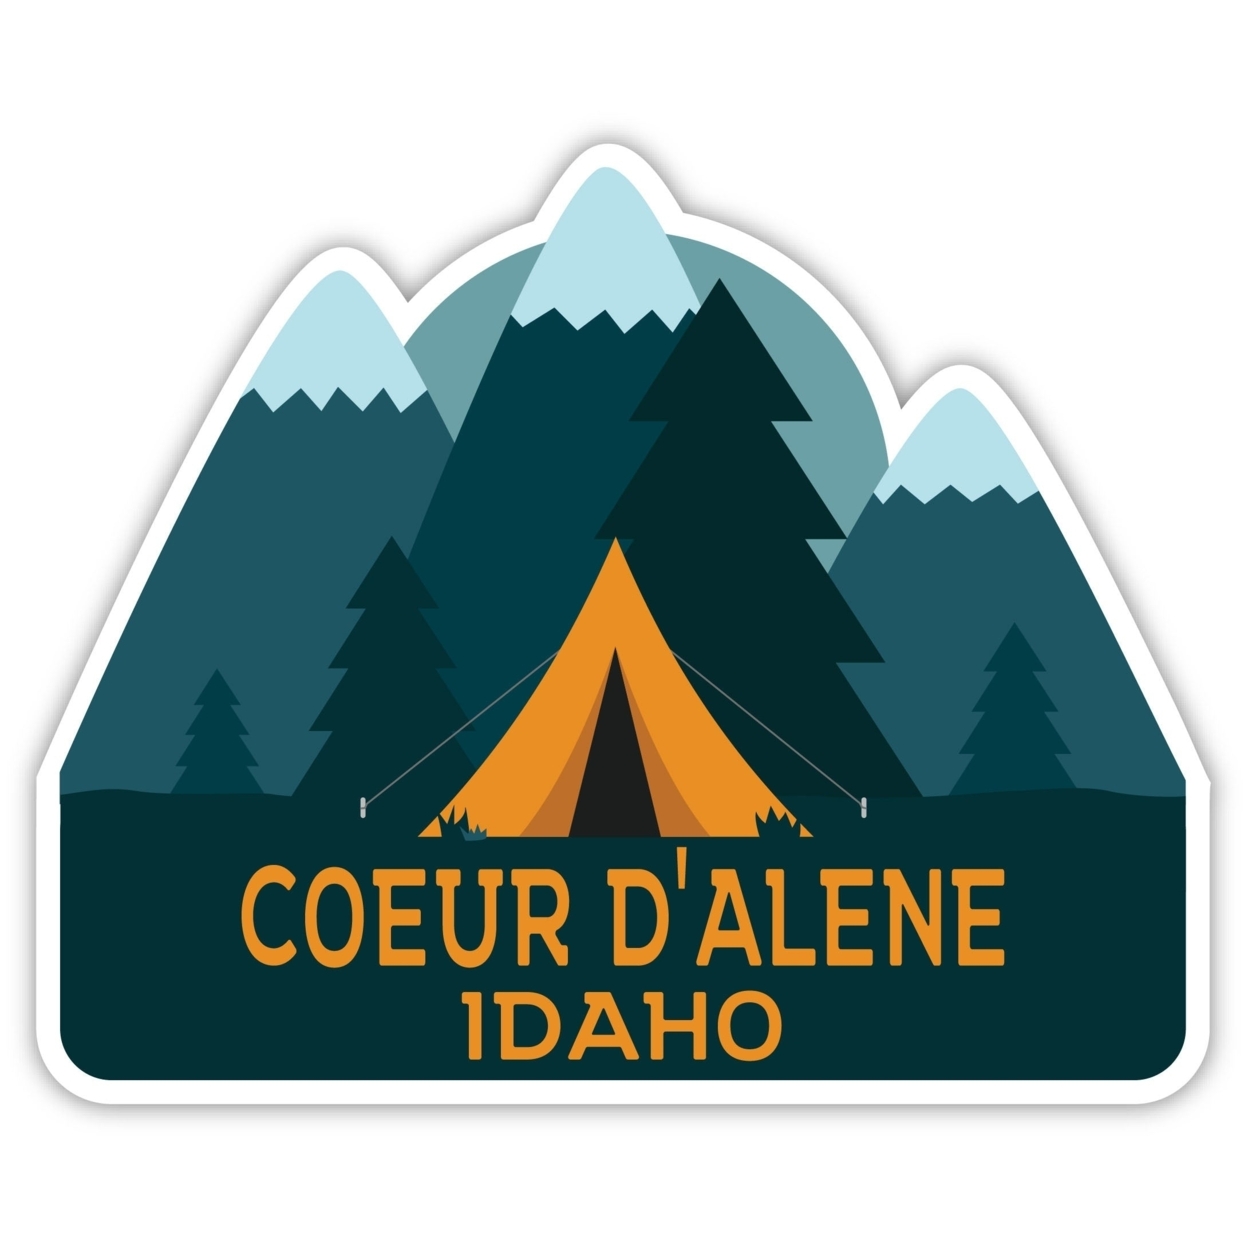 Coeur D'Alene Idaho Souvenir Decorative Stickers (Choose Theme And Size) - 4-Pack, 2-Inch, Camp Life